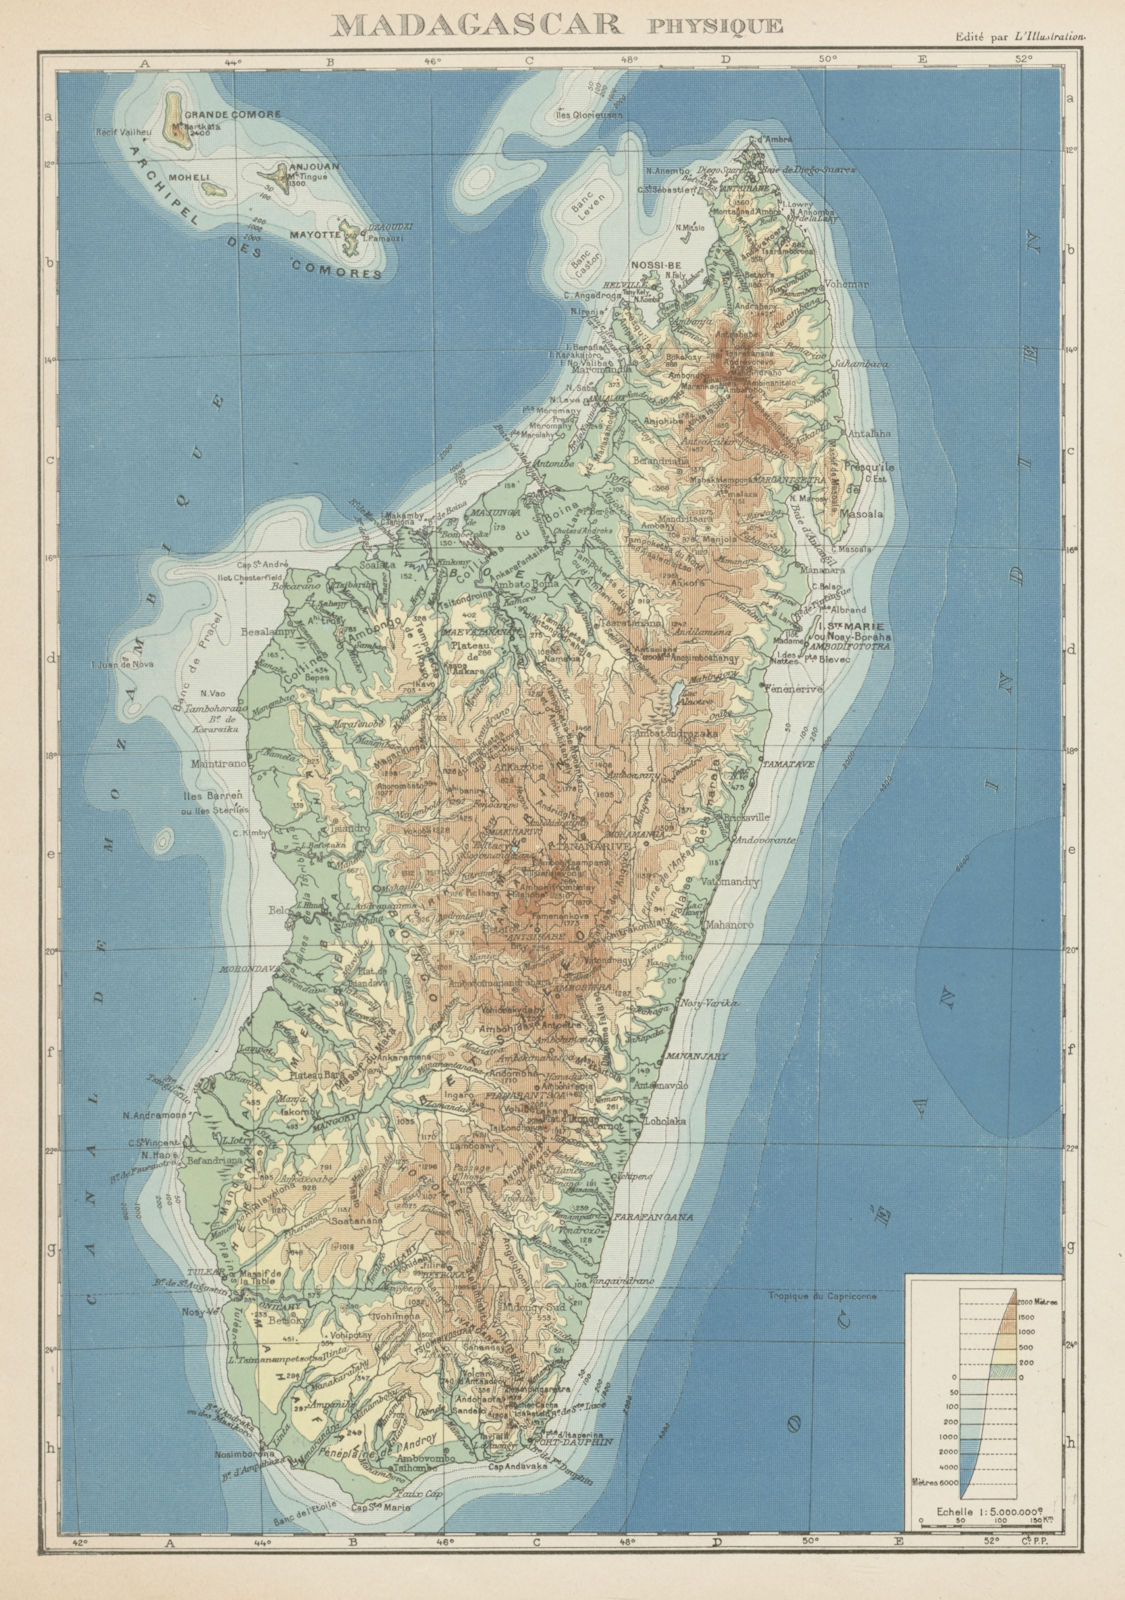 Associate Product COLONIAL MADAGASCAR. Physique physical. Comoros & Mayotte 1929 old vintage map